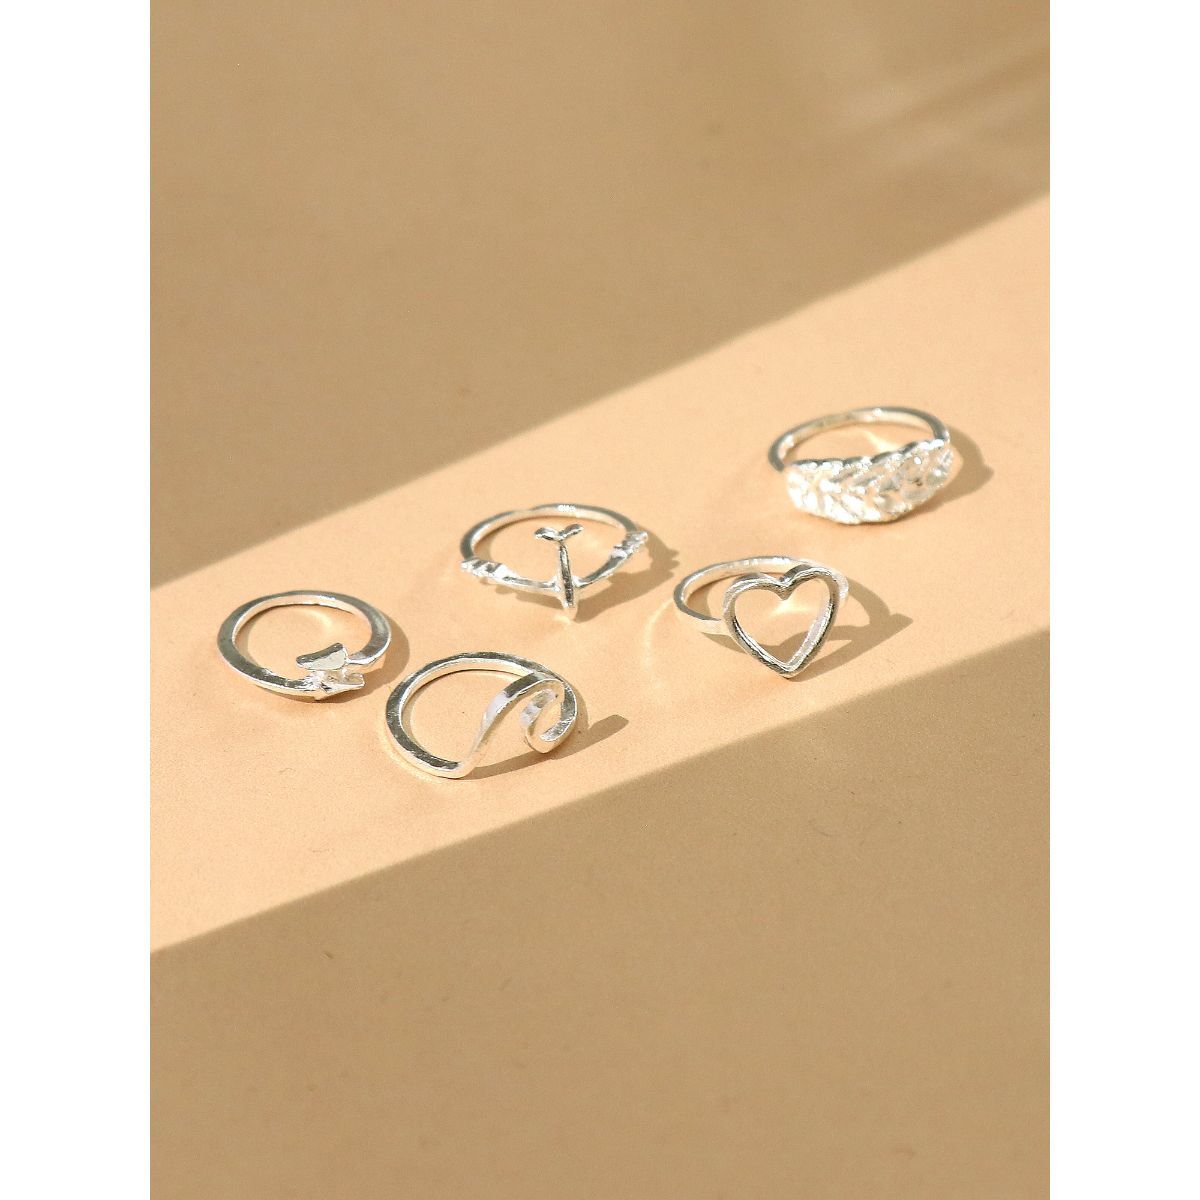 Silver plated Ocean Wave Ring Set of 5